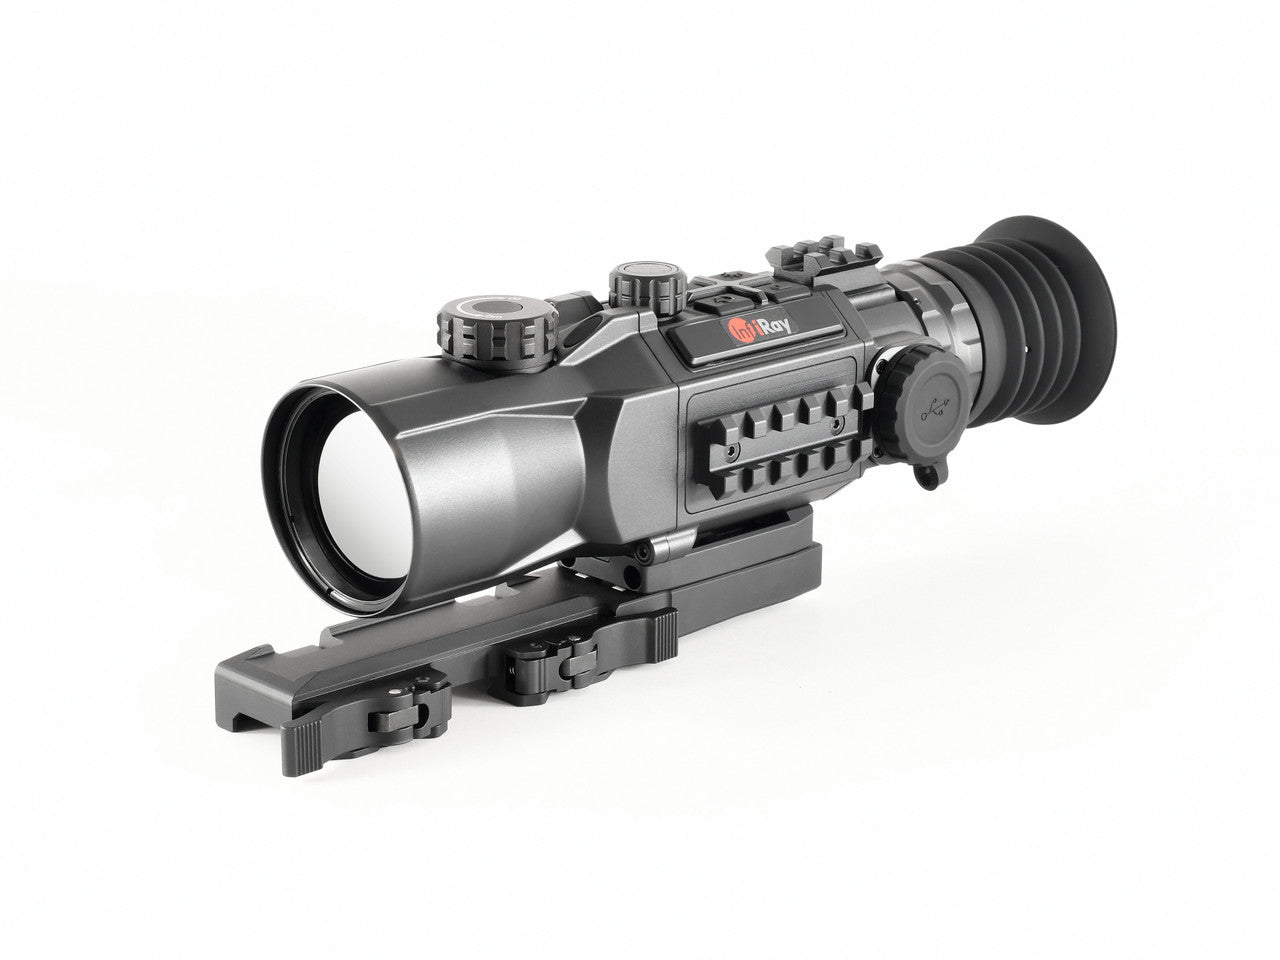 Demo InfiRay Outdoor Rico Hybrid 50 640 Thermal Scope